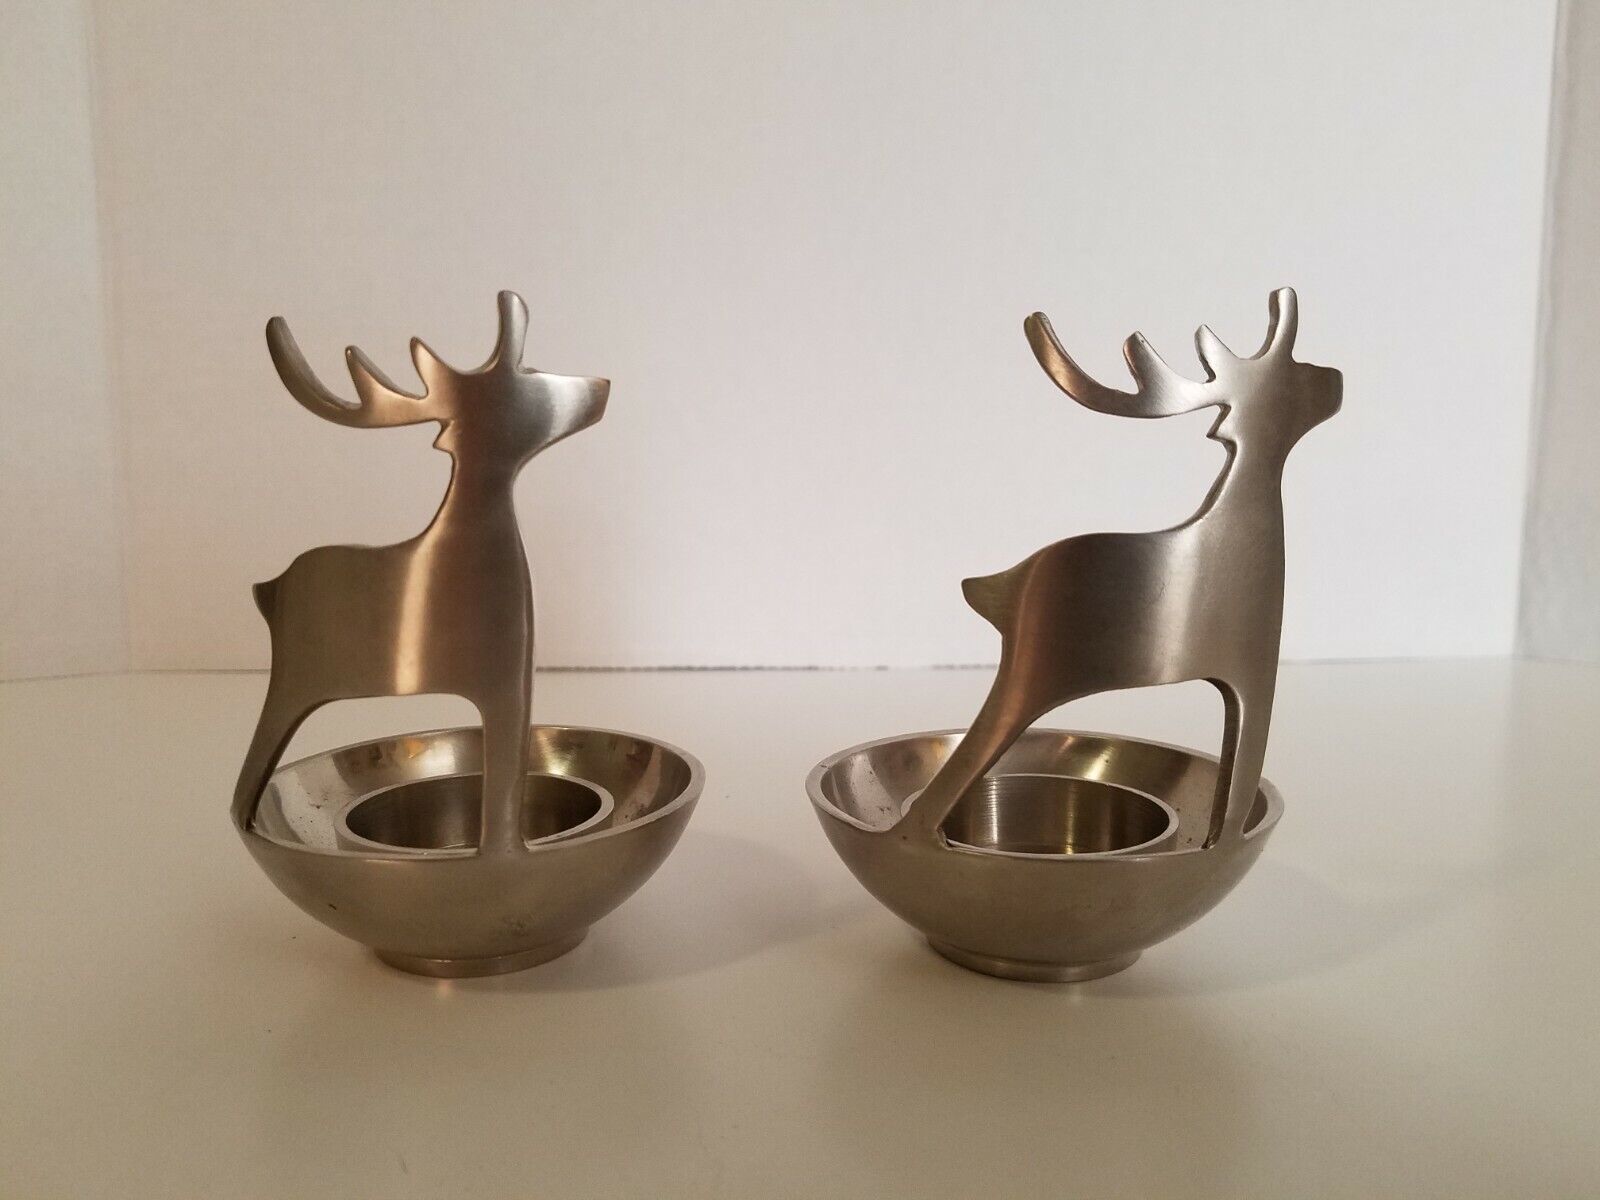 Pair Of Unique Reindeer Buck Votive Tealight Candle Holders Metal Silver India